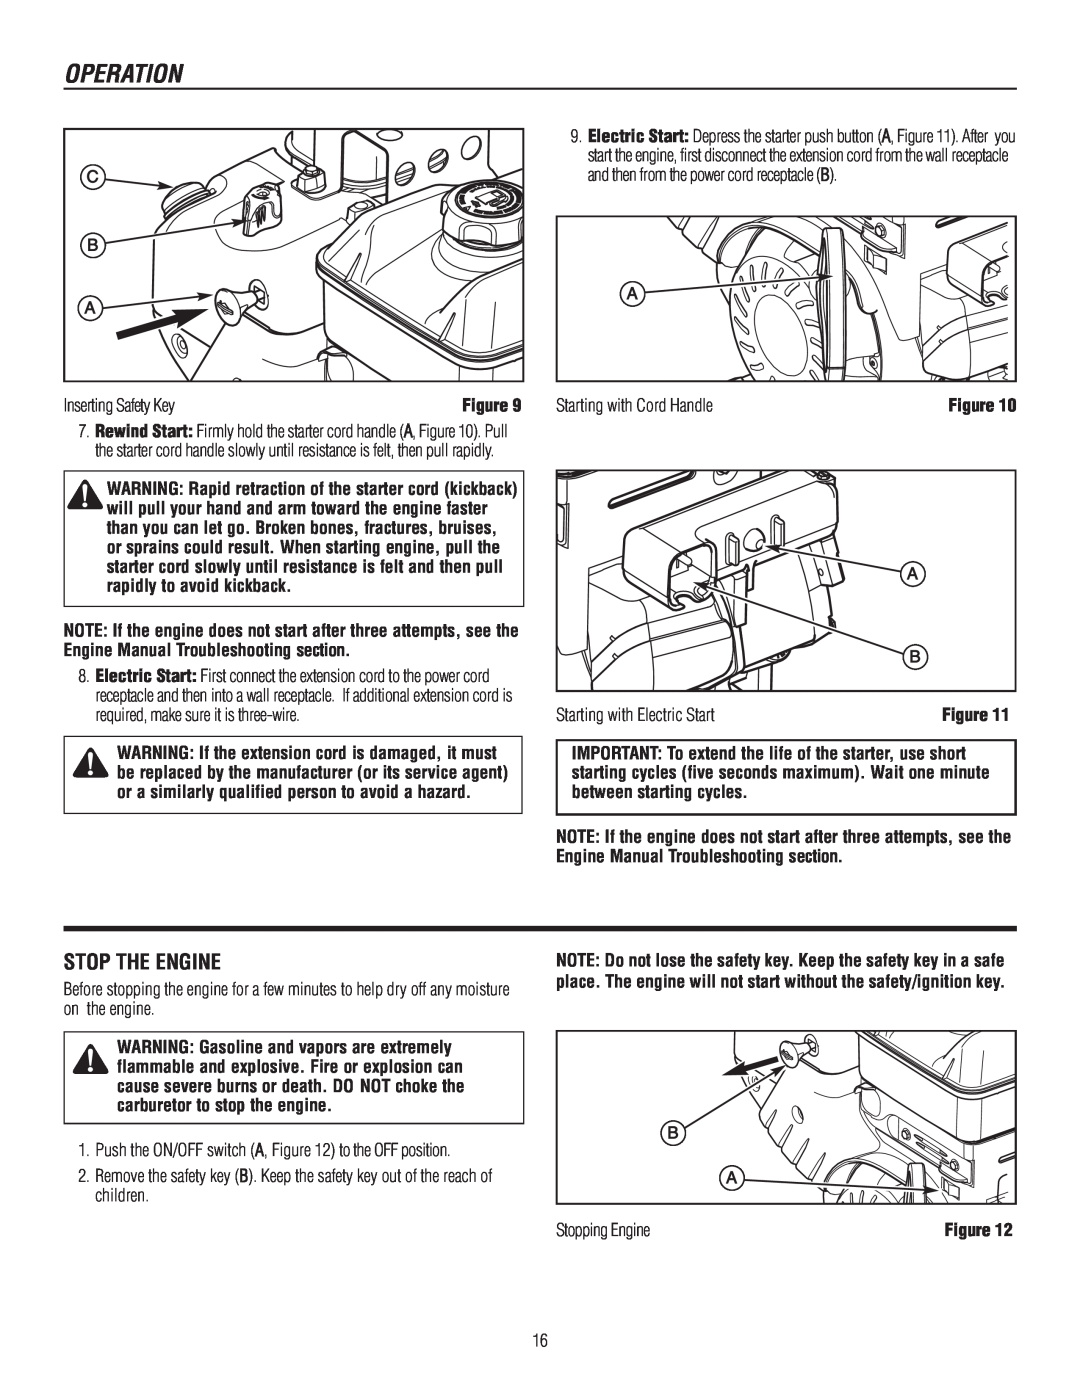 Murray 1695722, 1737920 manual Stop The Engine, Operation, and then from the power cord receptacle B, Inserting Safety Key 